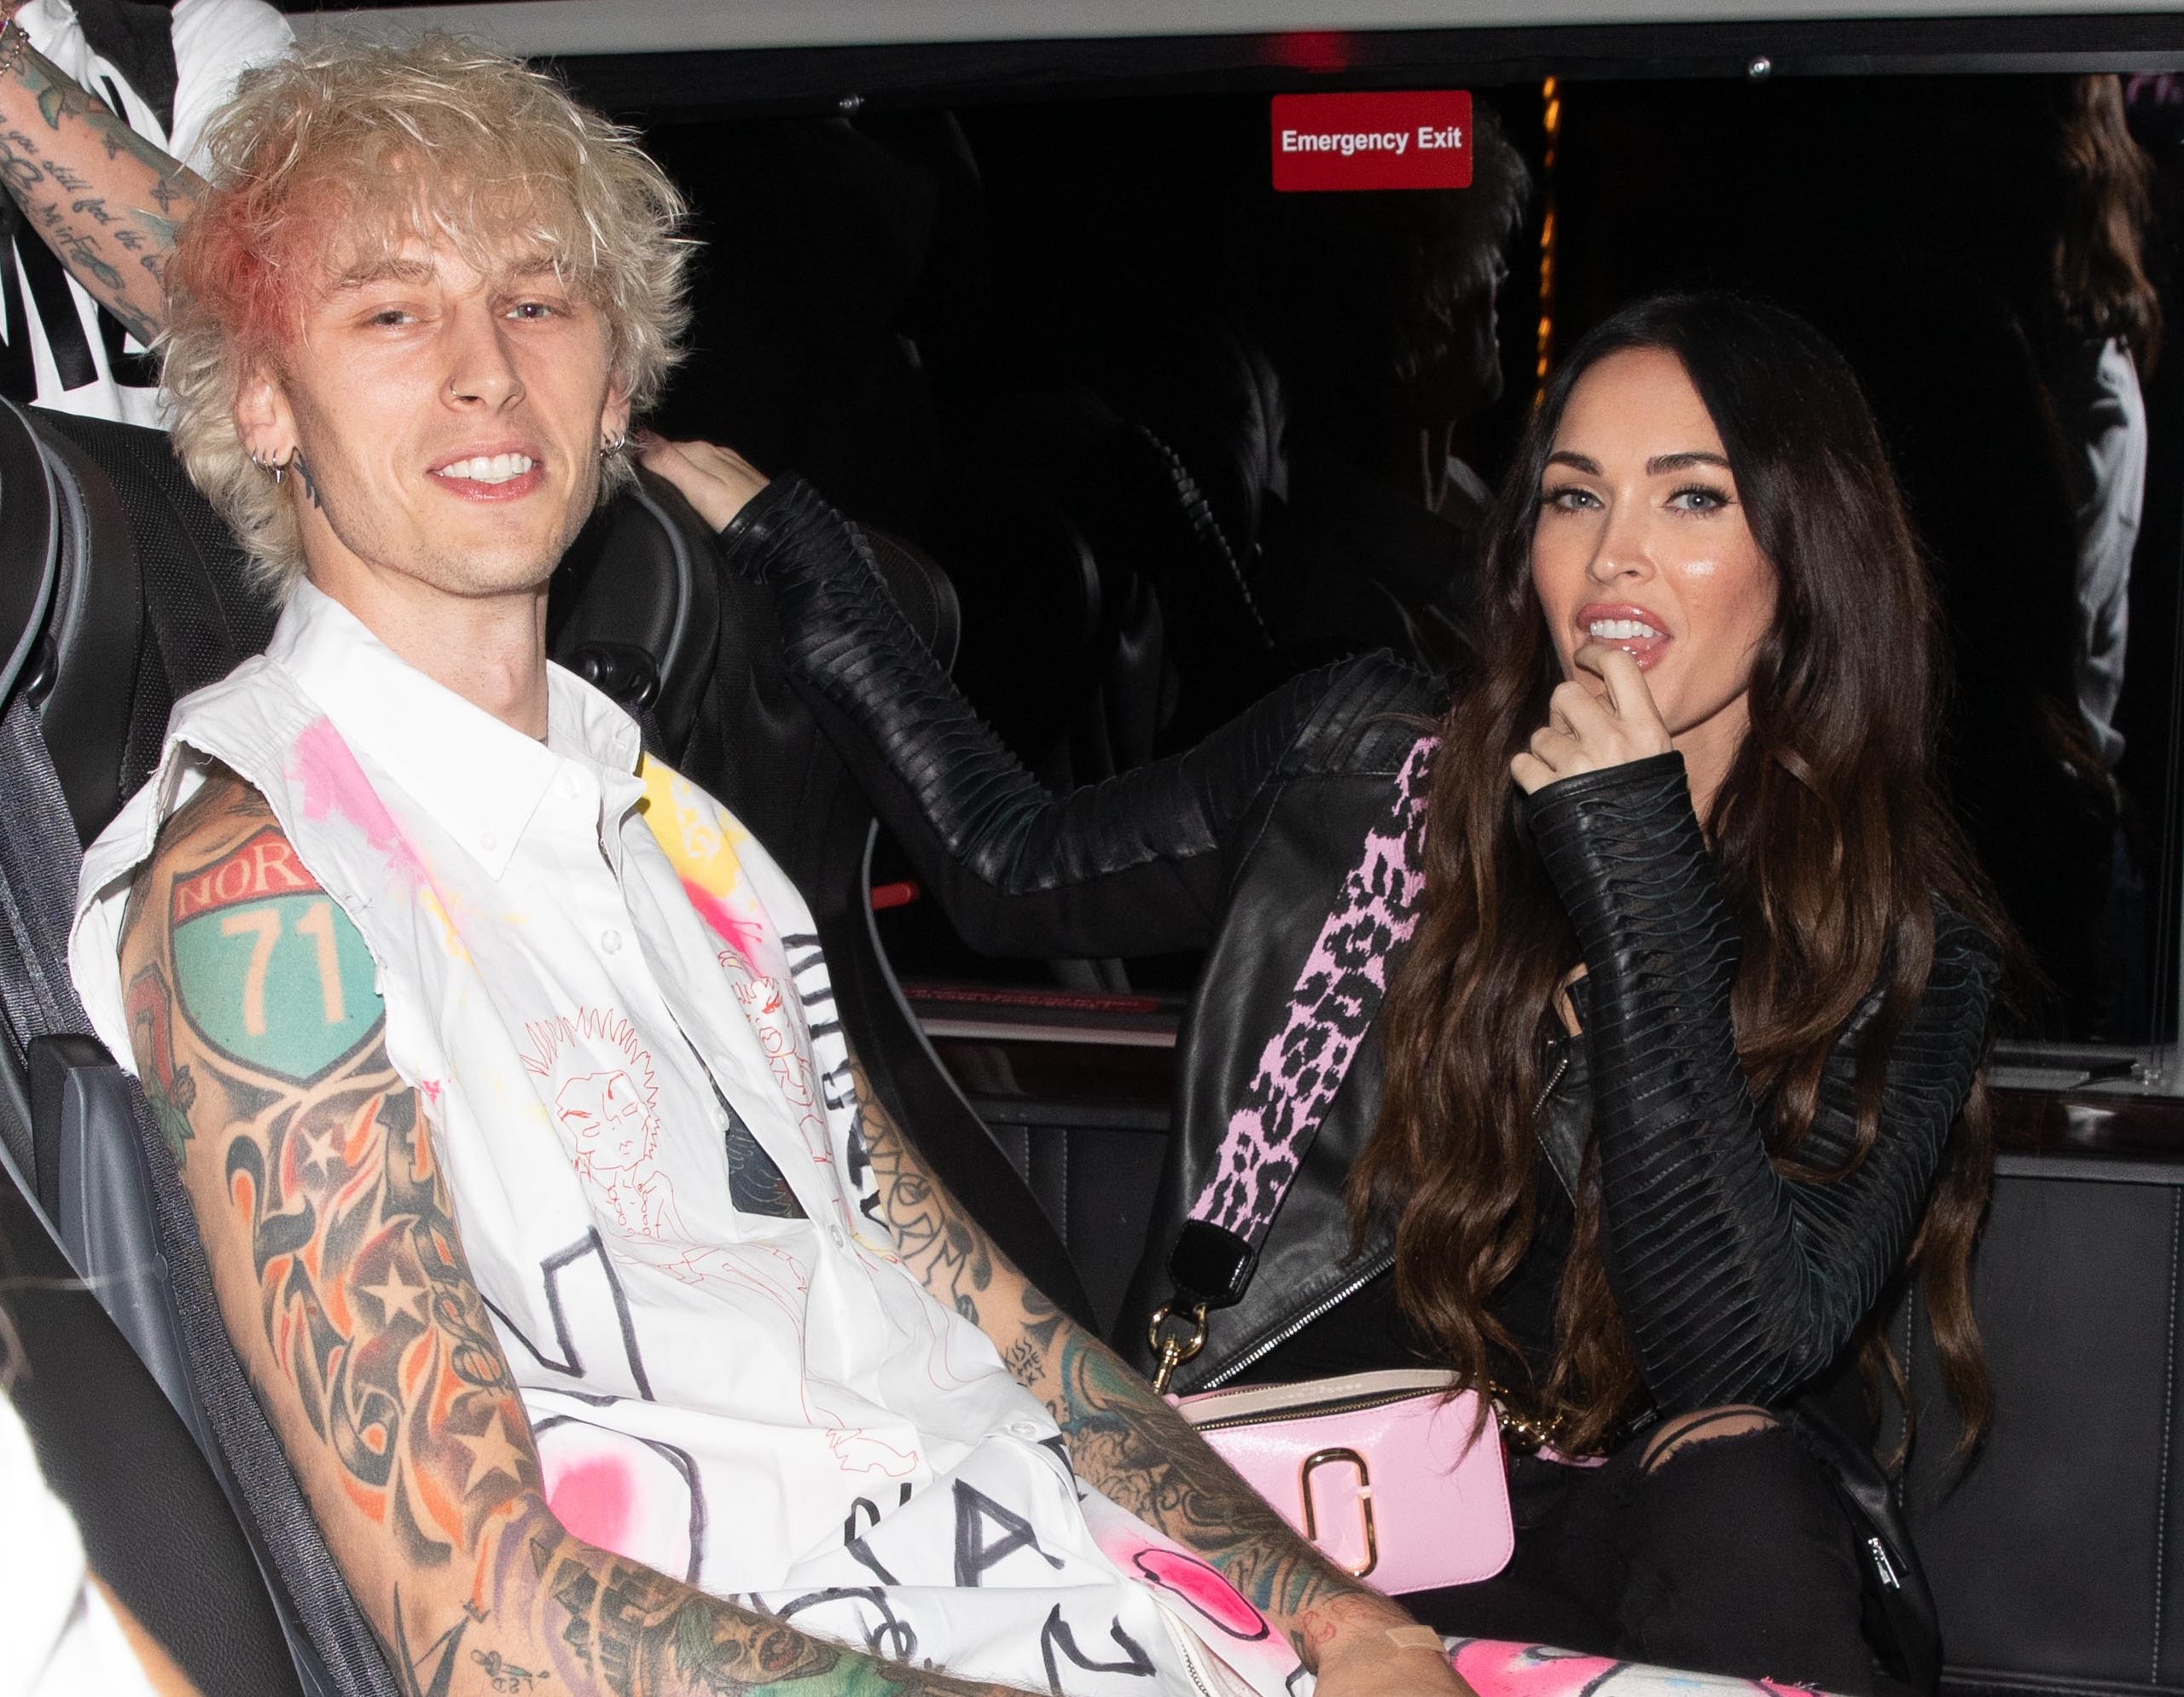 Machine Gun Kelly and Megan Fox are seen leaving a restaurant on September 24, 2020, in Los Angeles, California.